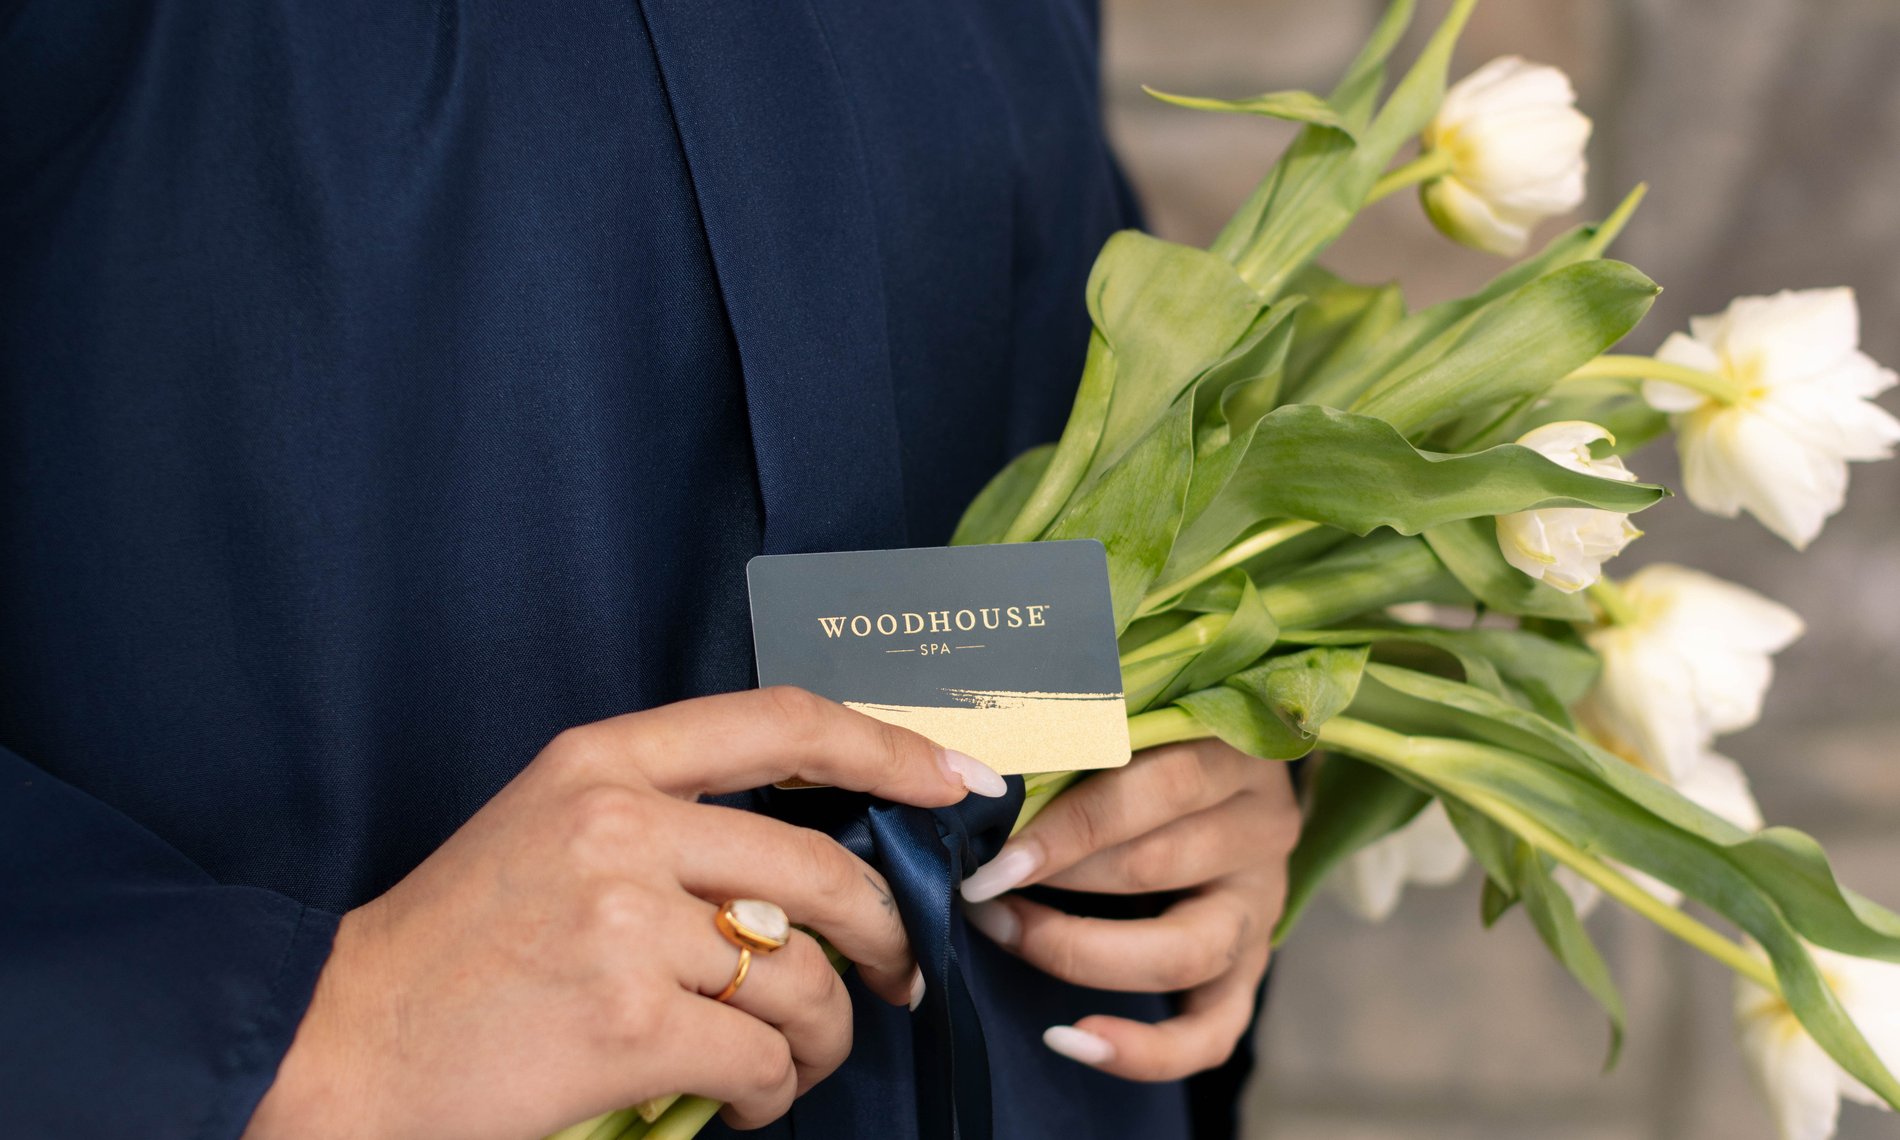 gradutate holding tulips and a woodhouse spa gift card